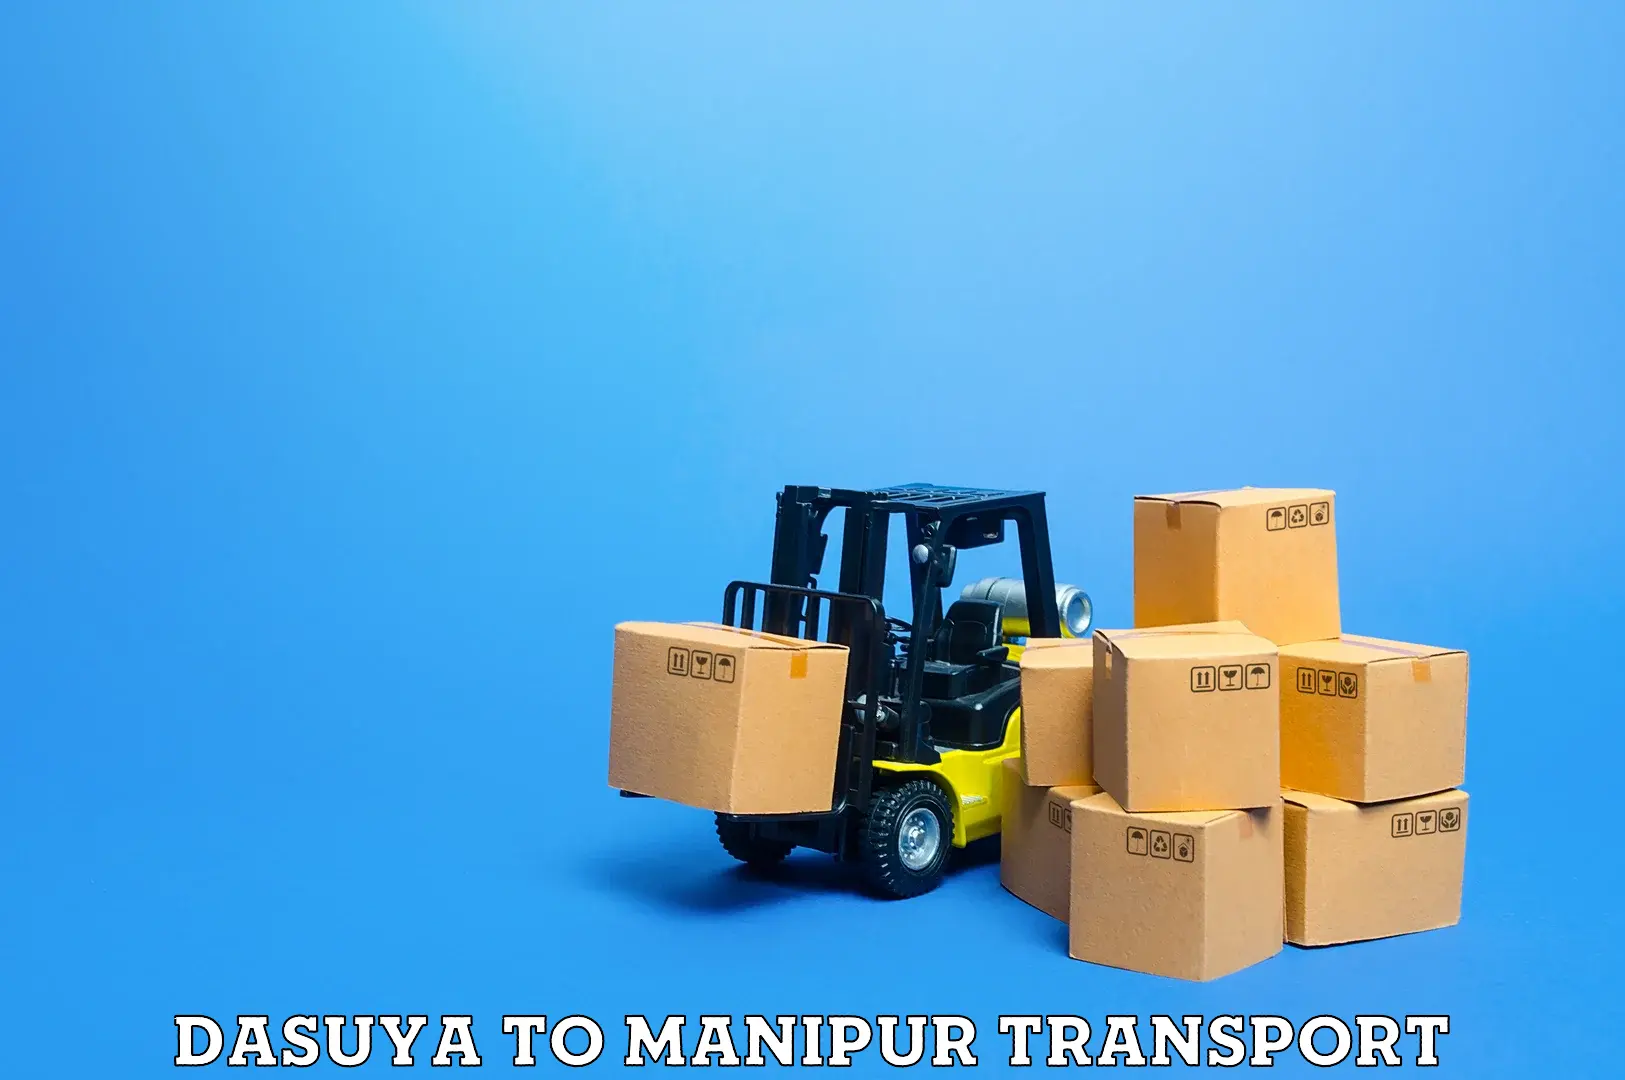 Transport bike from one state to another Dasuya to Manipur